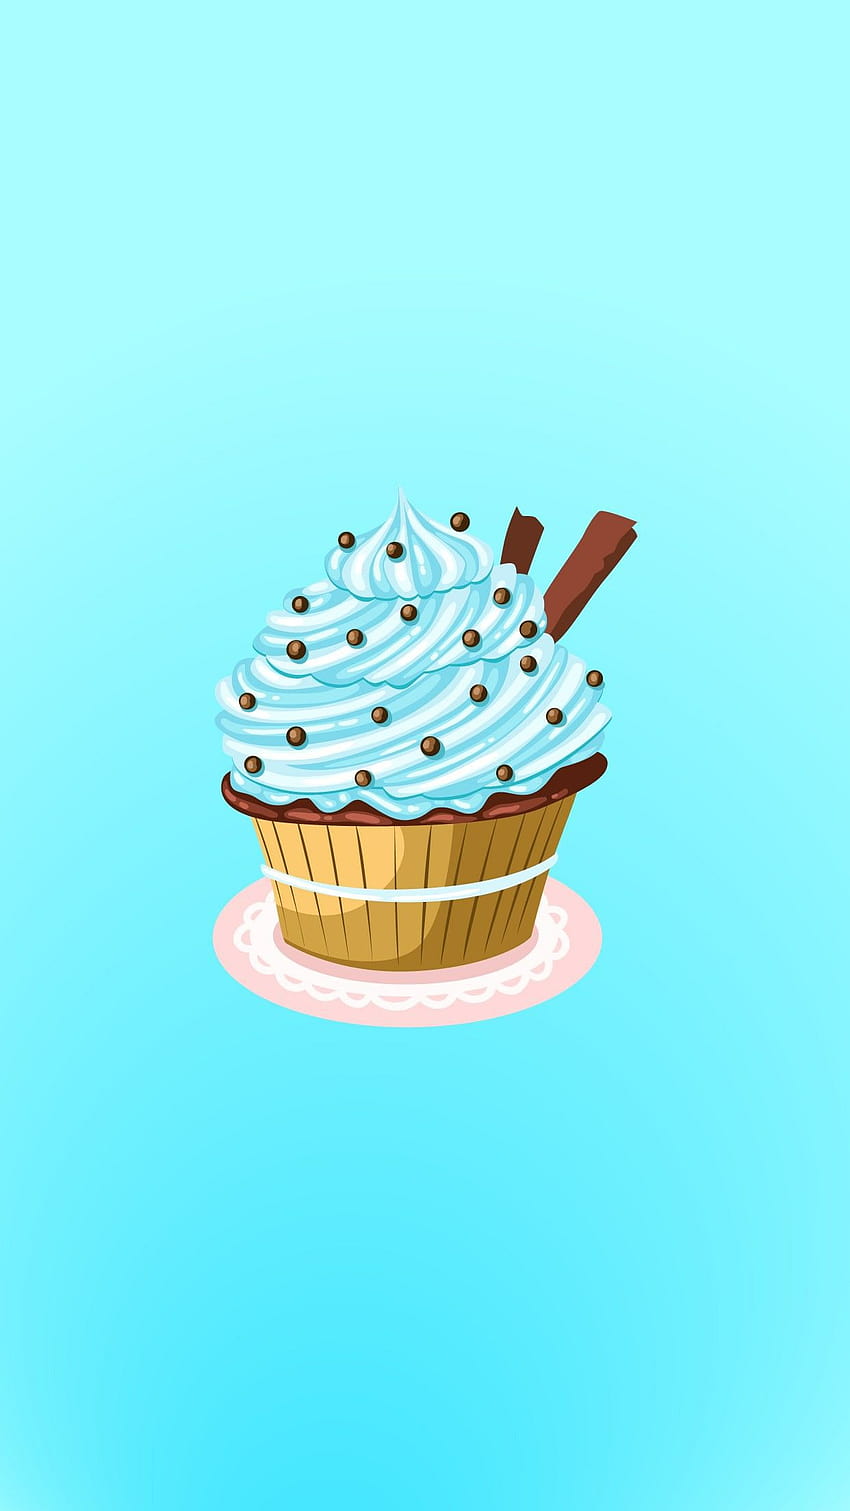 Cute Cupcake Backgrounds 49 images